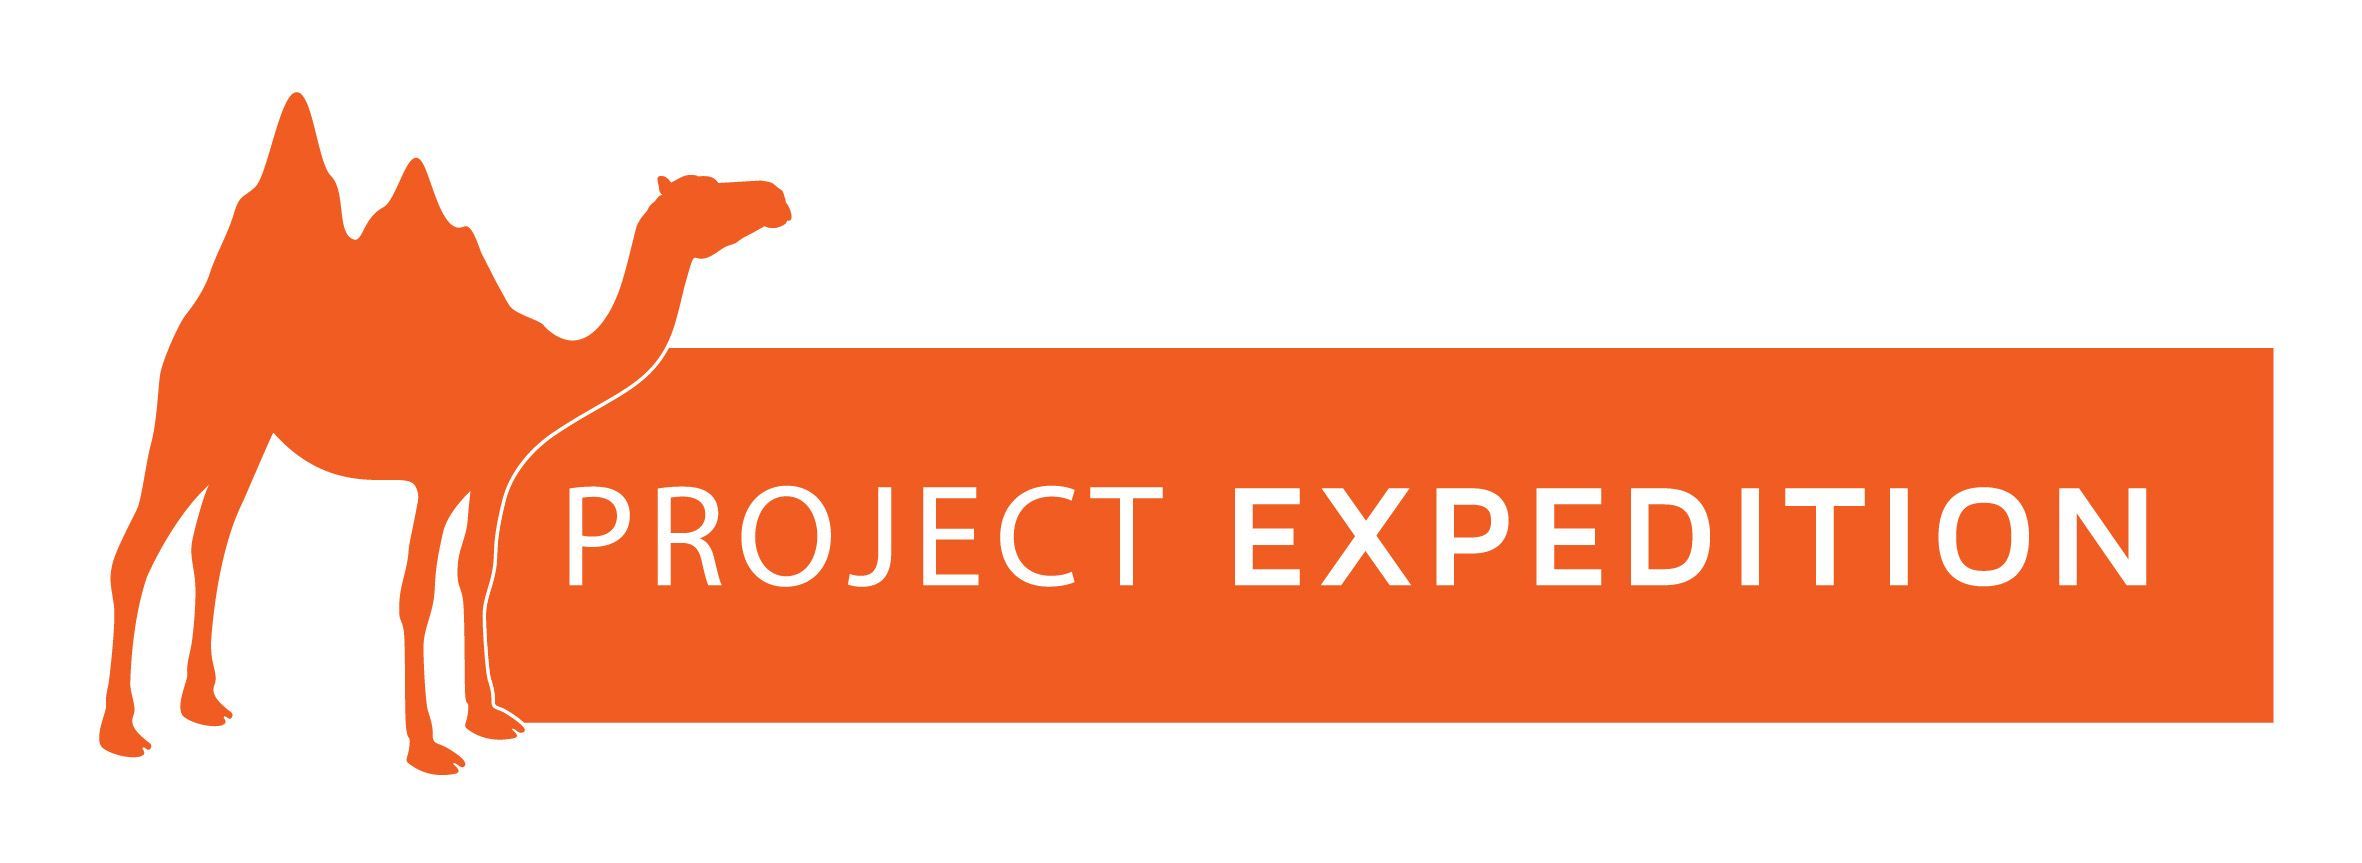 Project-Expedition-Logo.jpg